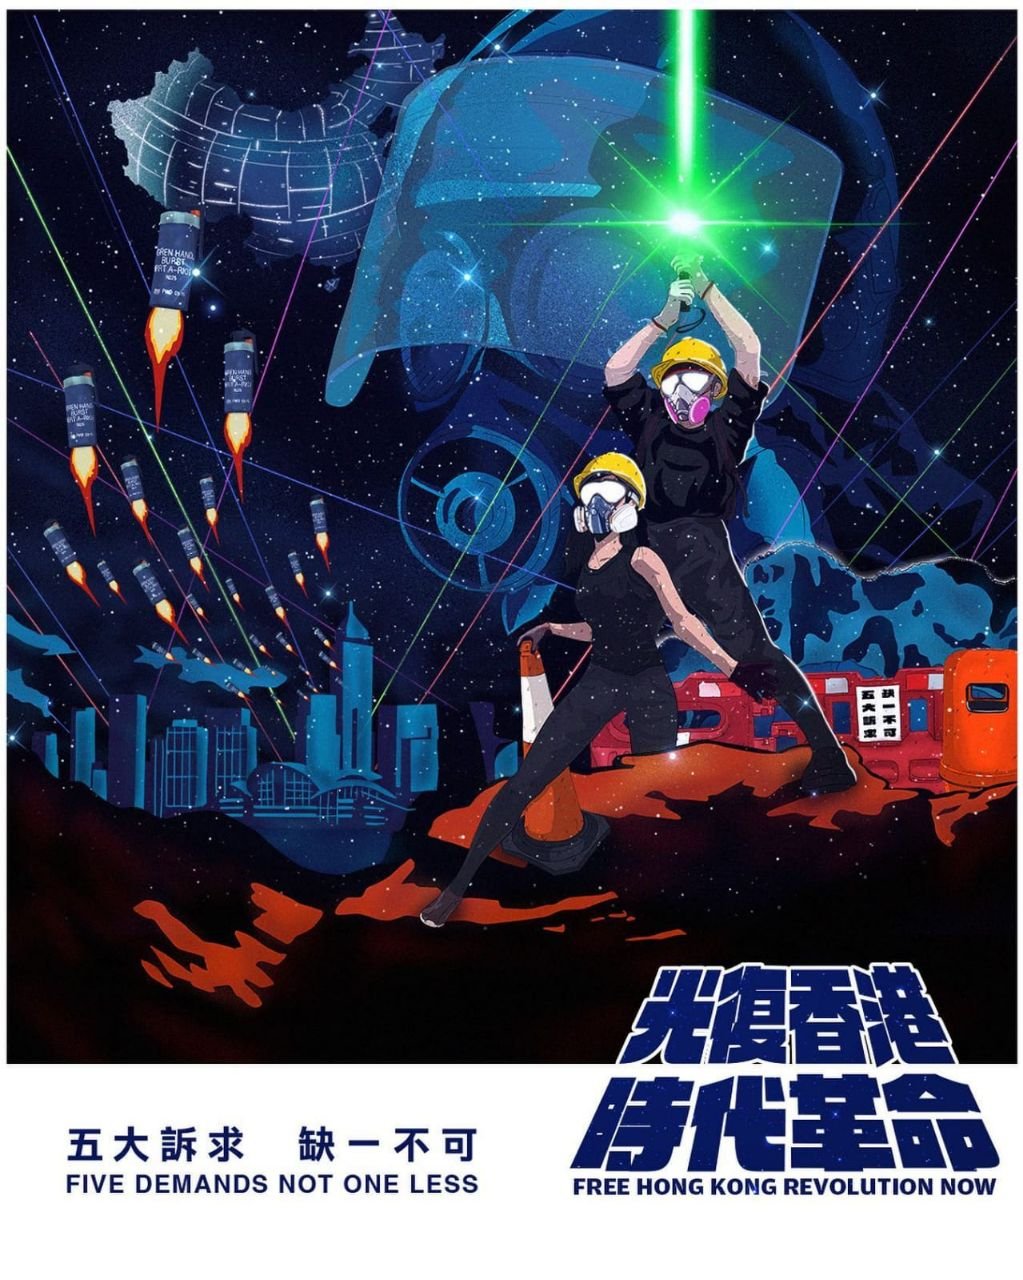 An illustration copying Tom Jung's Star Wars poster, with a male and female protestor taking the place of Luke and Leia, R2-D2 replaced with a Hong Kong style orange trash bin, and flying tear-gas canisters instead of X-wings. Vader in the back has been replaced with a gas-masked riot cop.